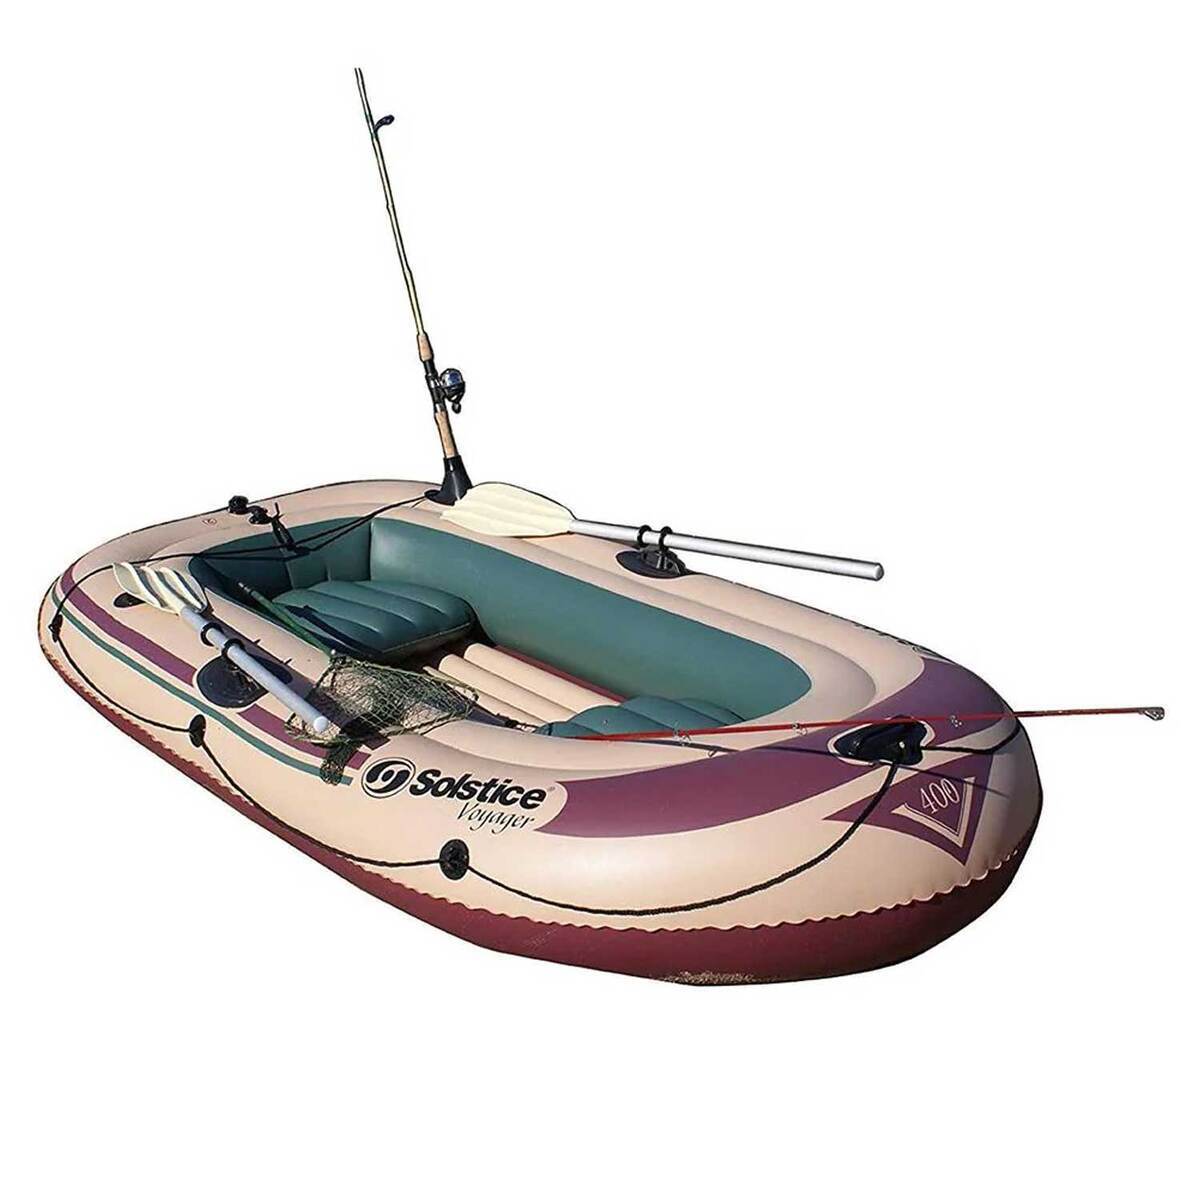 Solstice Voyager 4 Person Boat Kit